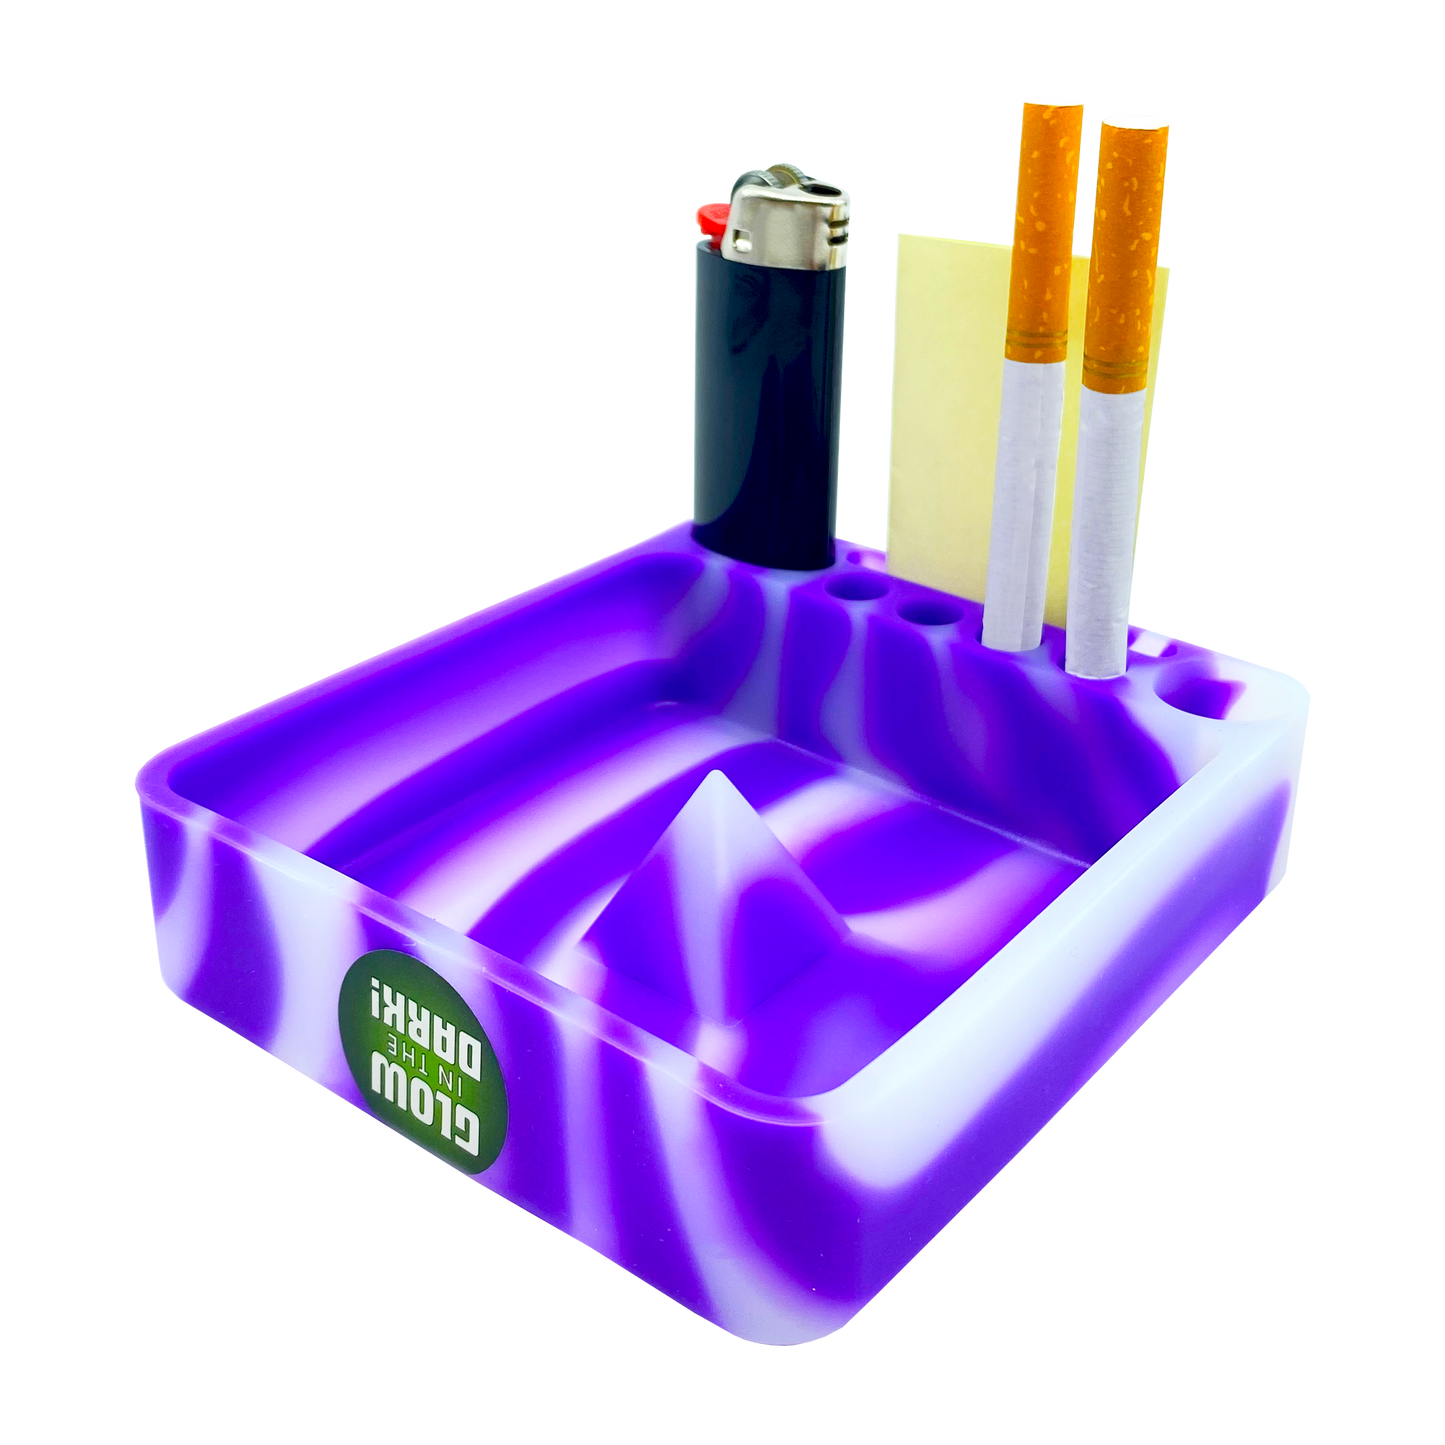 ITEM NUMBER 040957 SILICONE PYRAMID ASHTRAY 6 PIECES PER DISPLAY